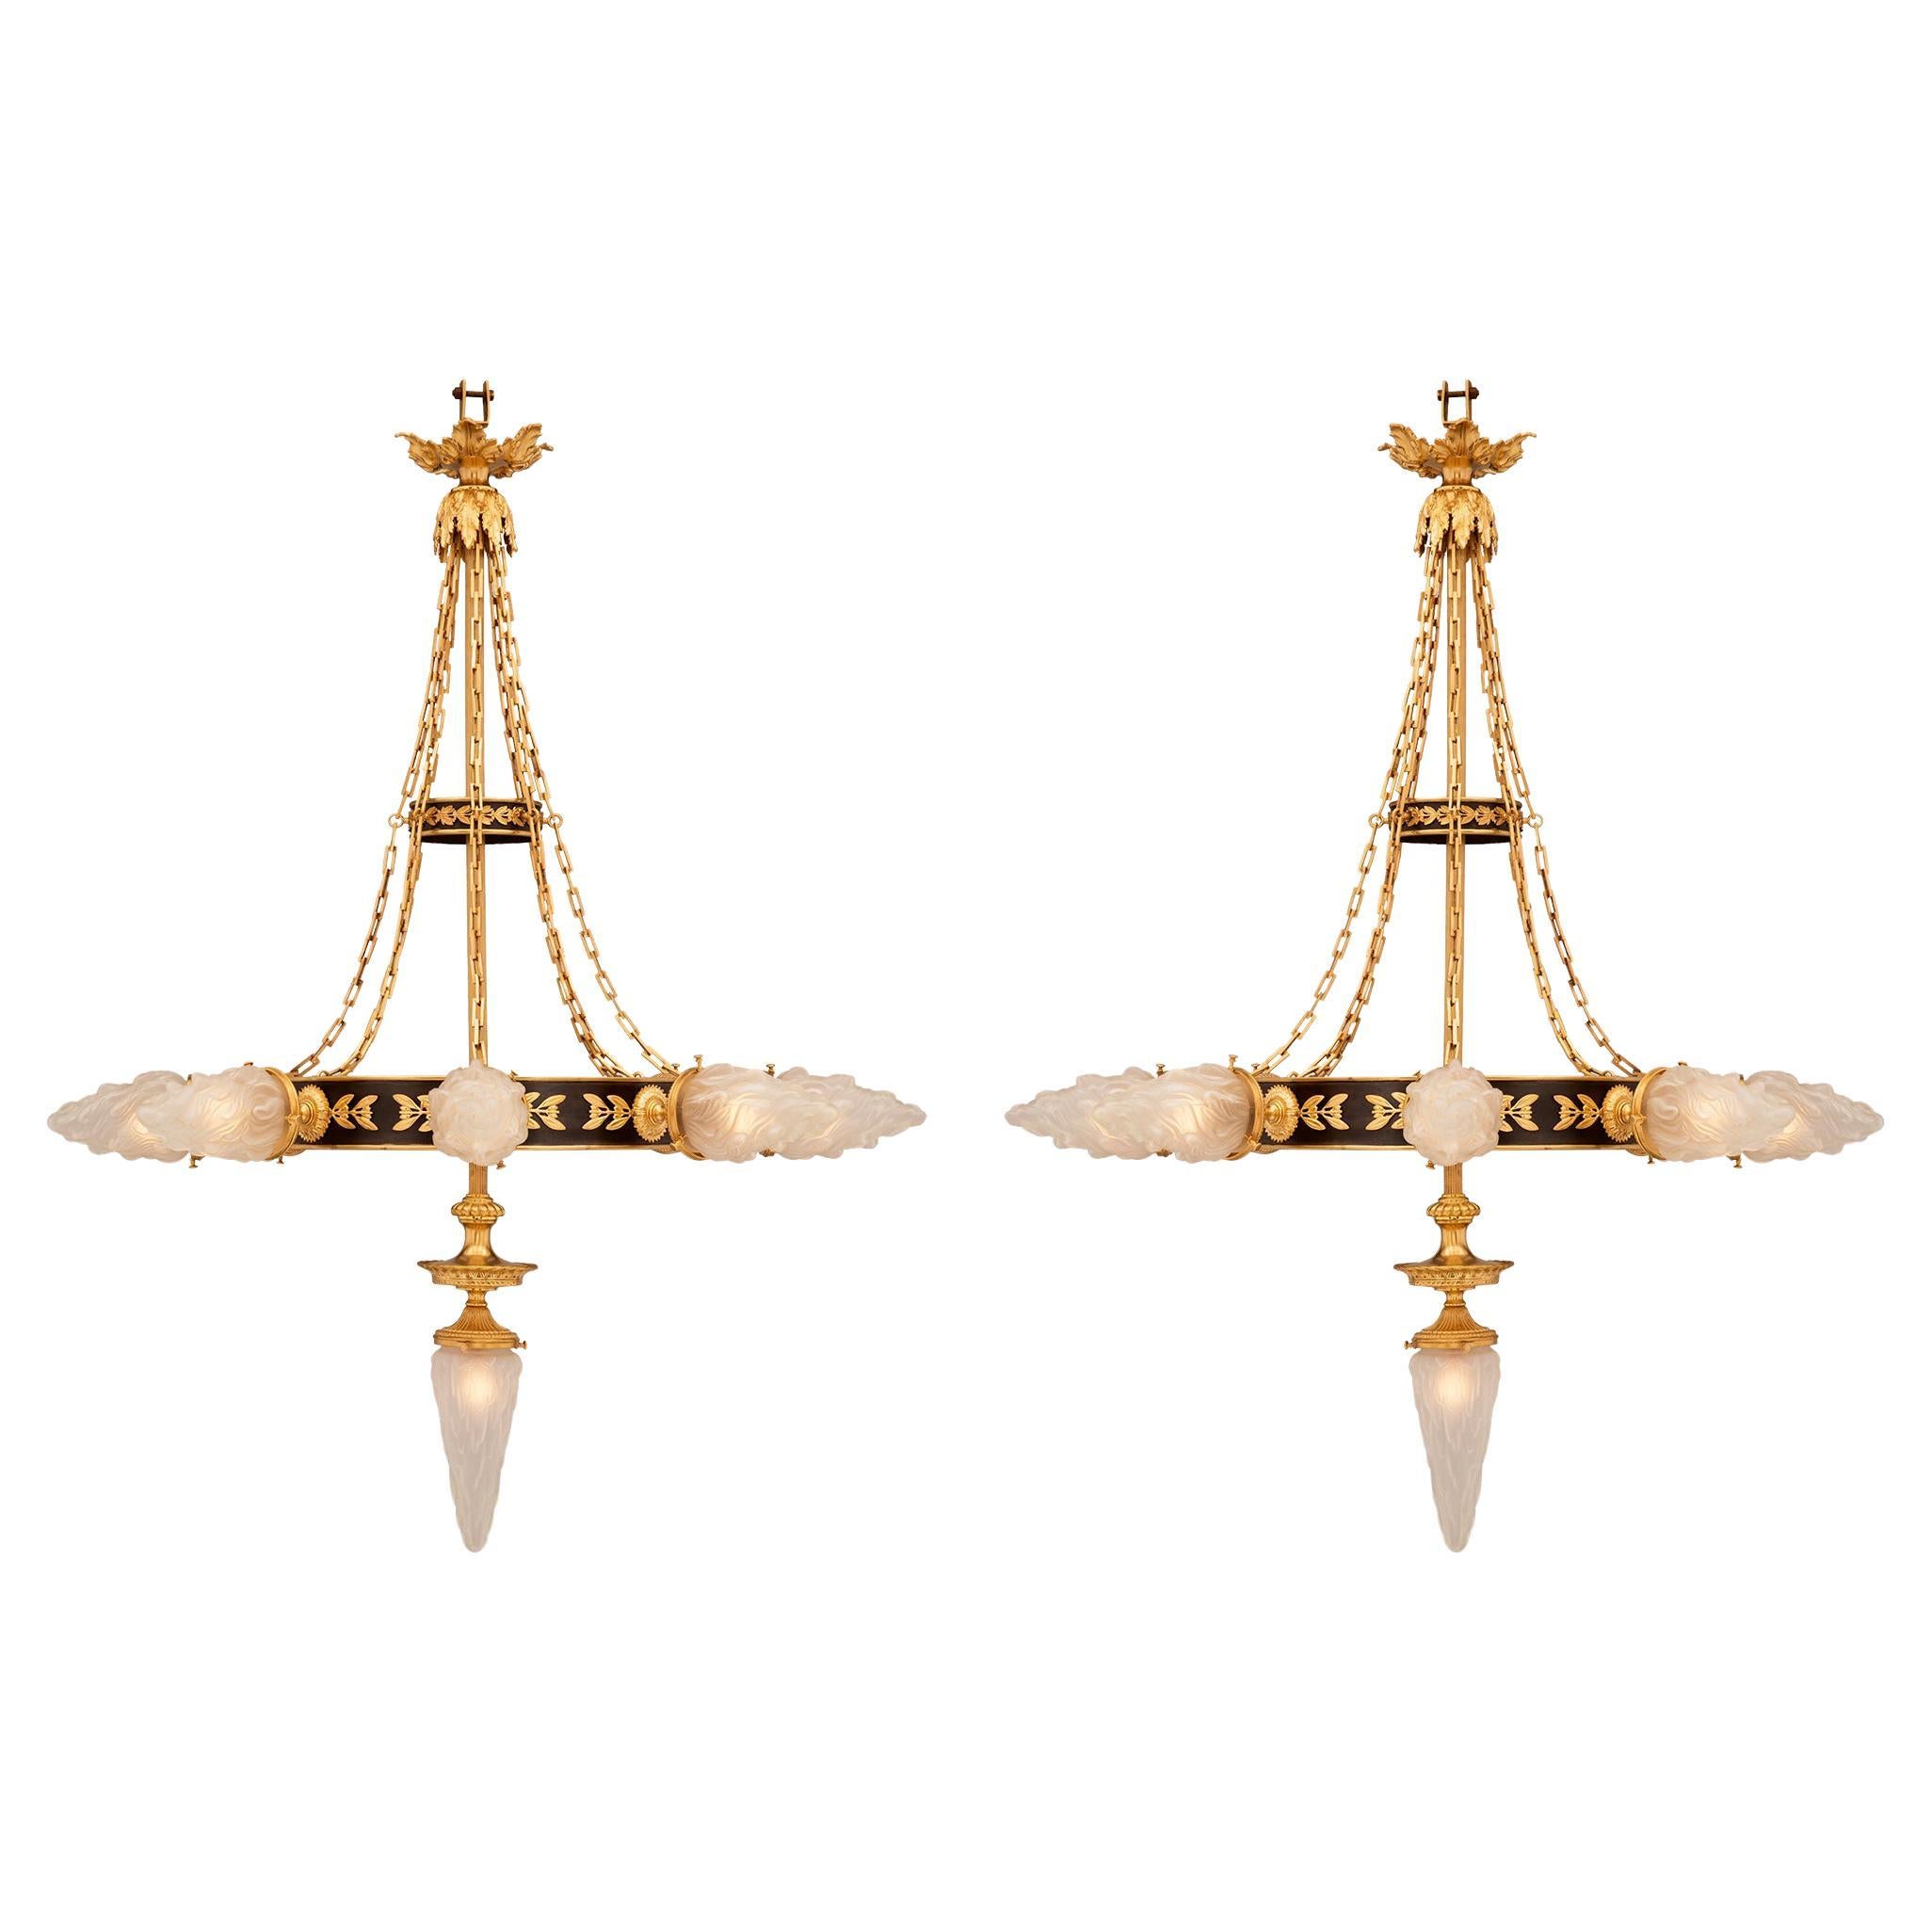 Pair of French 19th Century Neoclassical Bronze, Ormolu and Glass Chandeliers For Sale